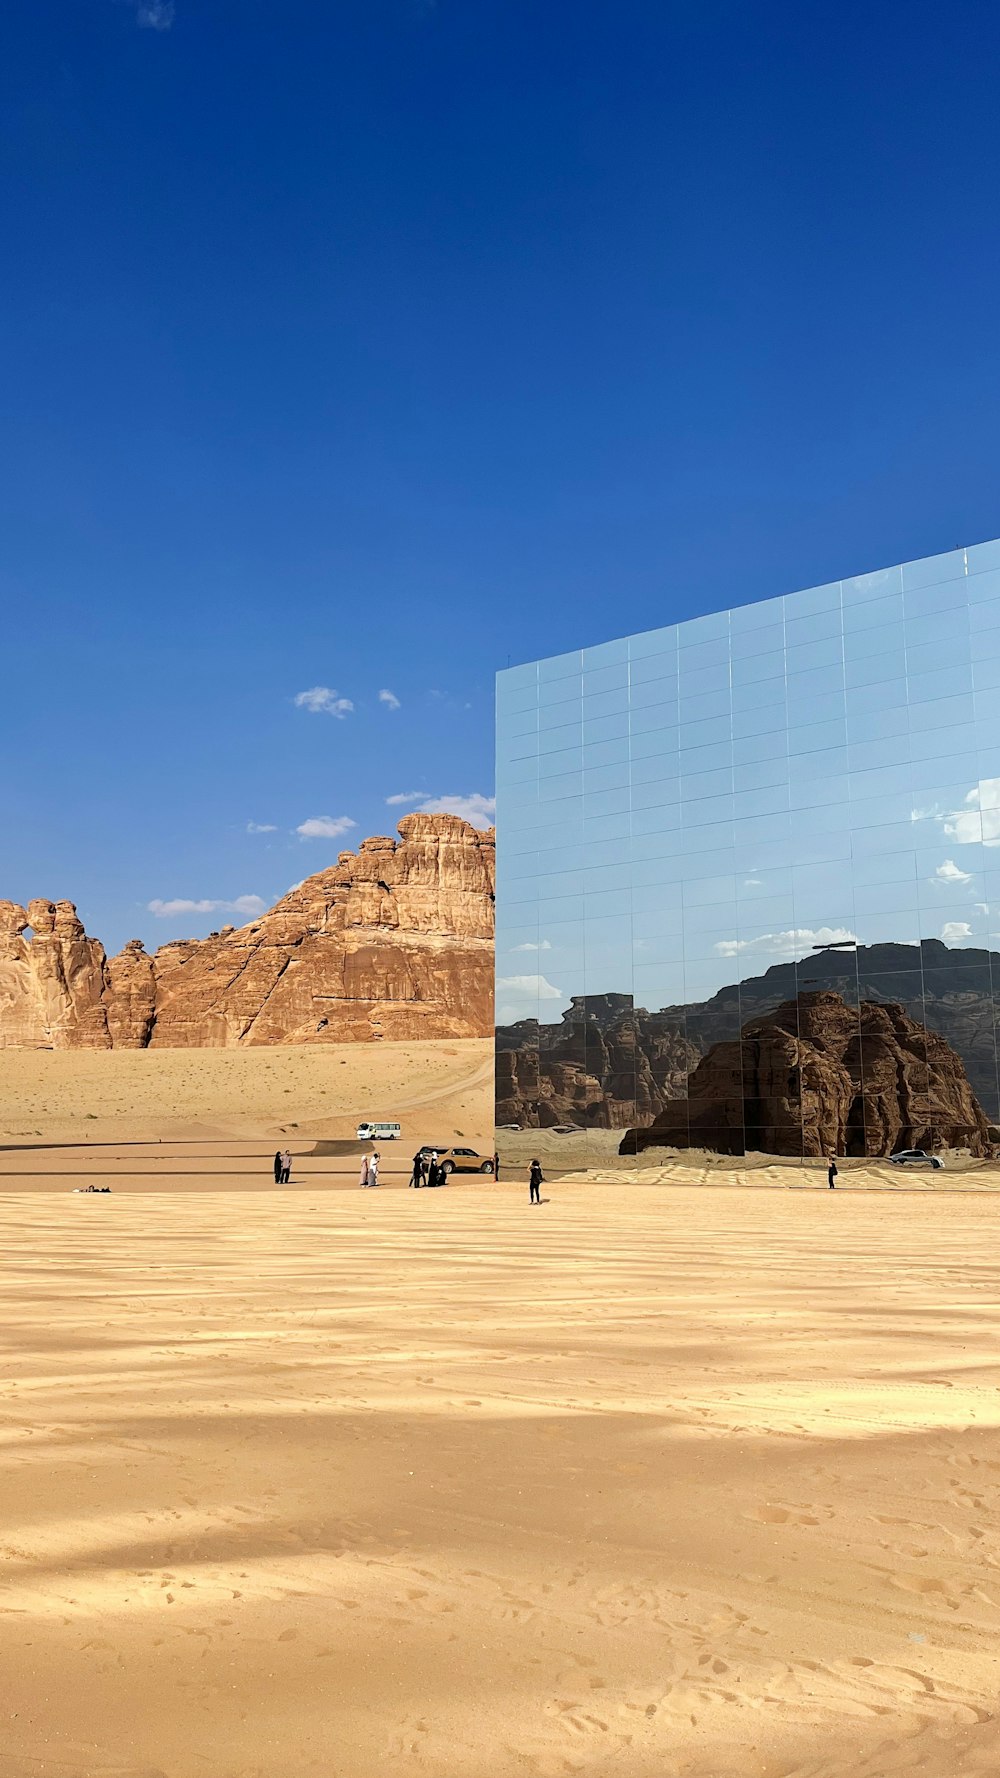 a desert scene with a large mirror in the middle